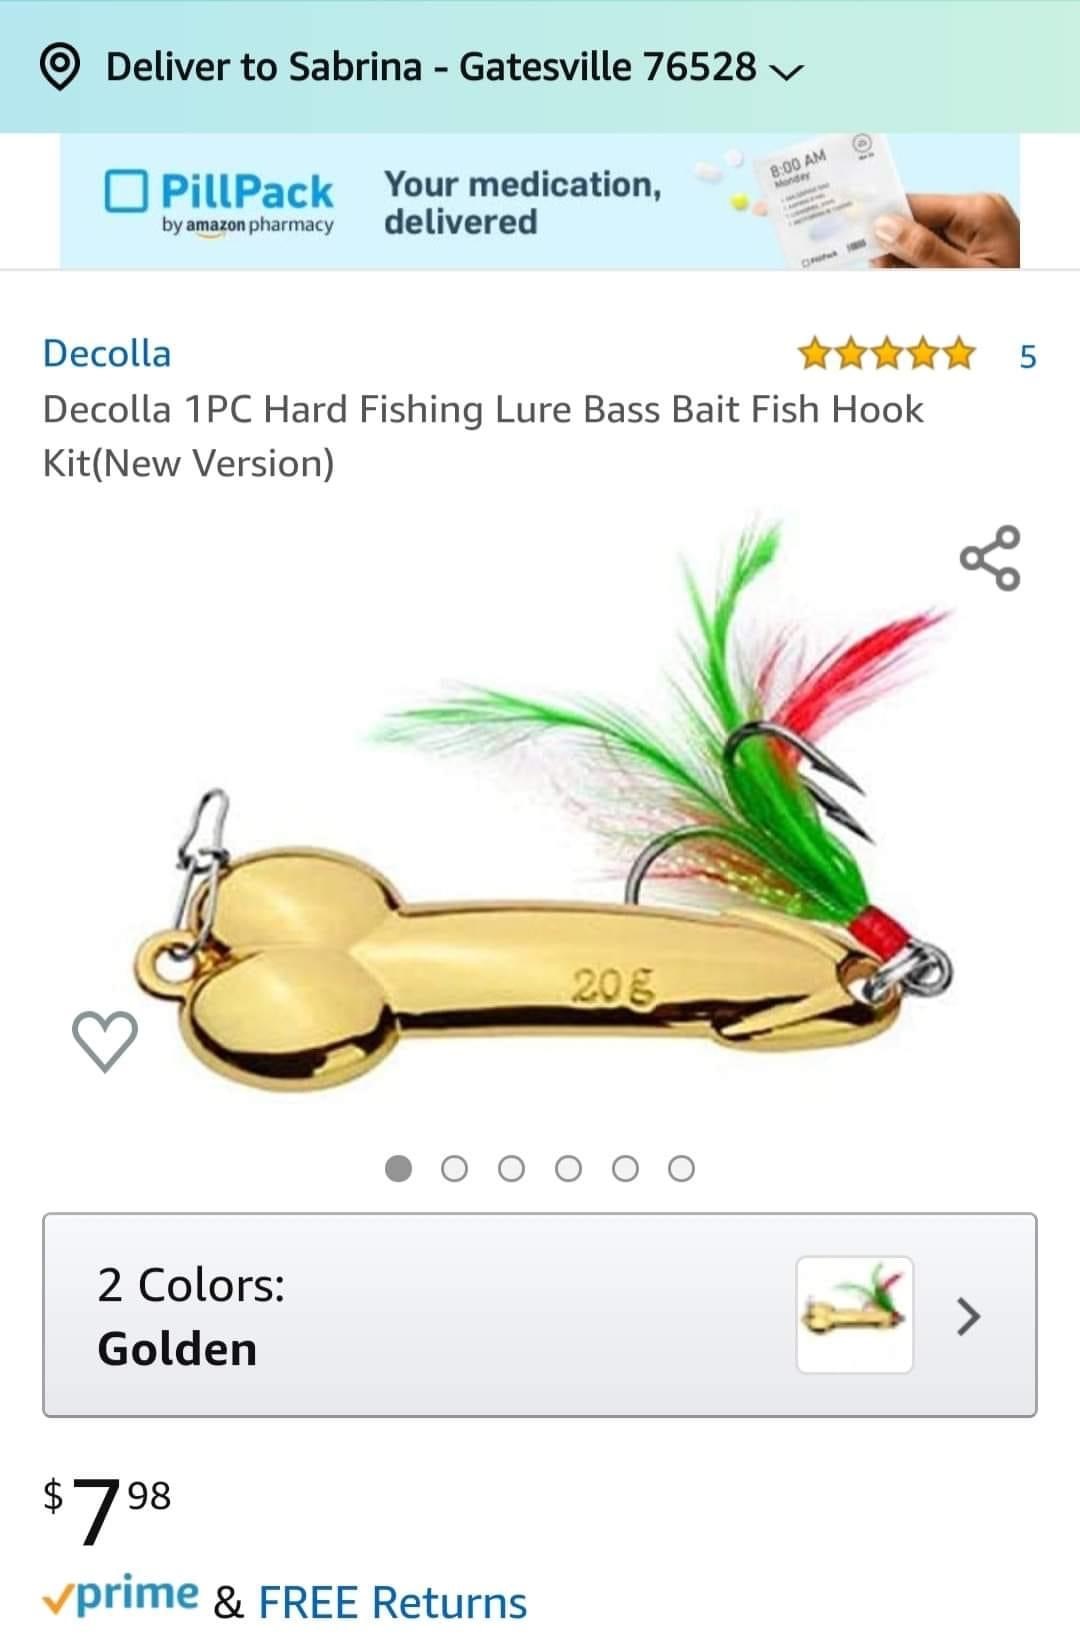 fishing bait - Deliver to Sabrina Gatesville 76528 v PillPack Your medication, by amazon pharmacy Decolla Decolla 1PC Hard Fishing Lure Bass Bait Fish Hook KitNew Version 208 2 Colors Golden $ 798 prime & Free Returns